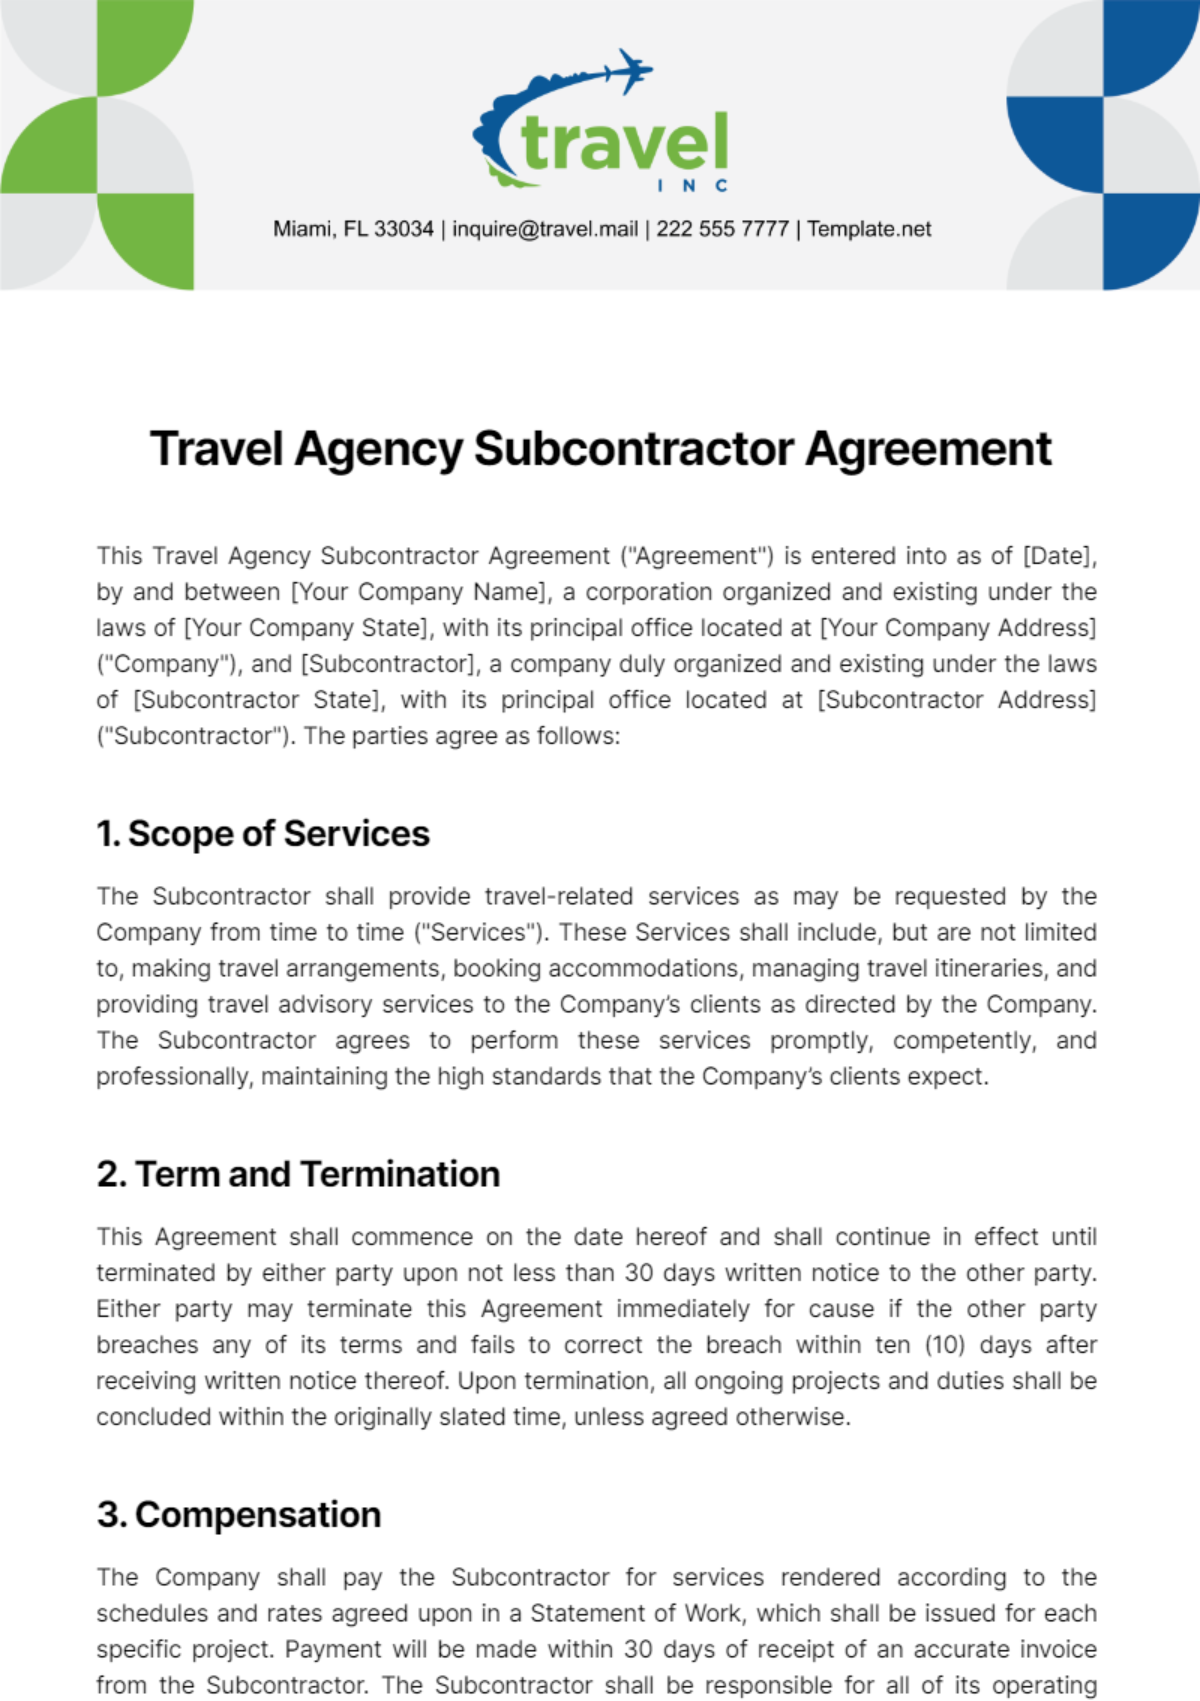 Free Travel Agency Subcontractor Agreement Template